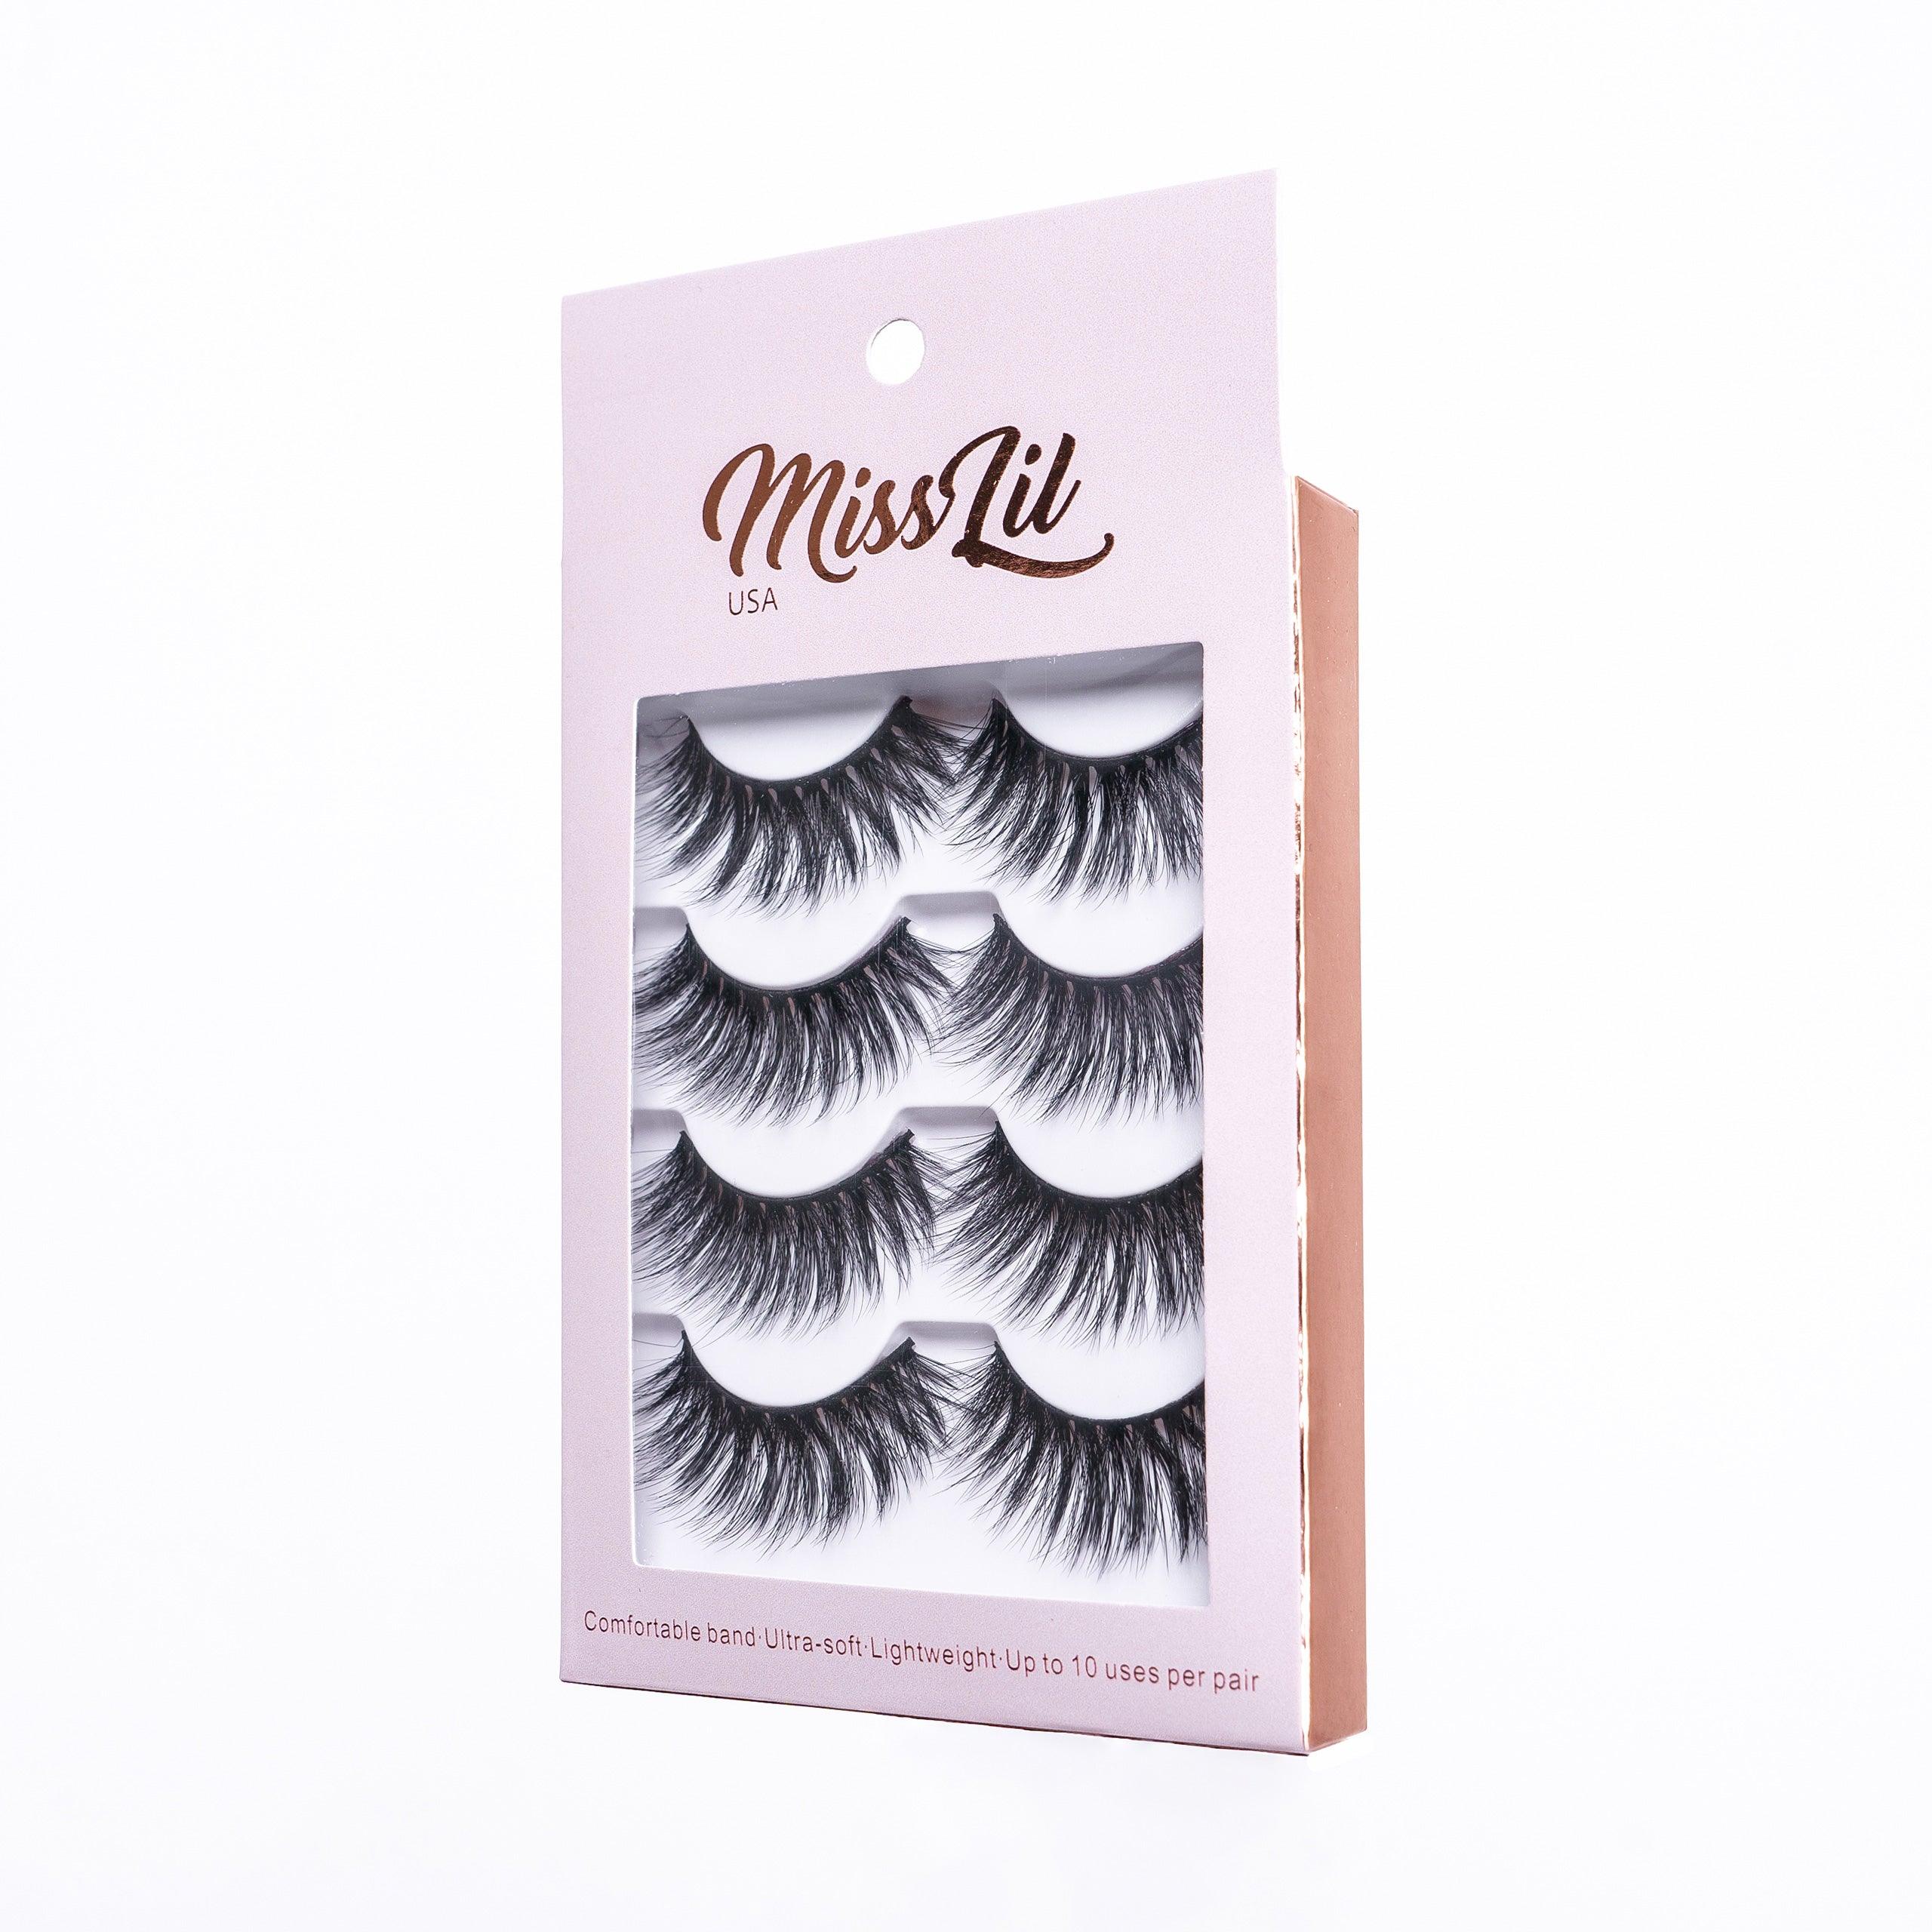 4 Pairs Lashes Classic Collection #28 (Pack of 12) - Miss Lil USA Wholesale